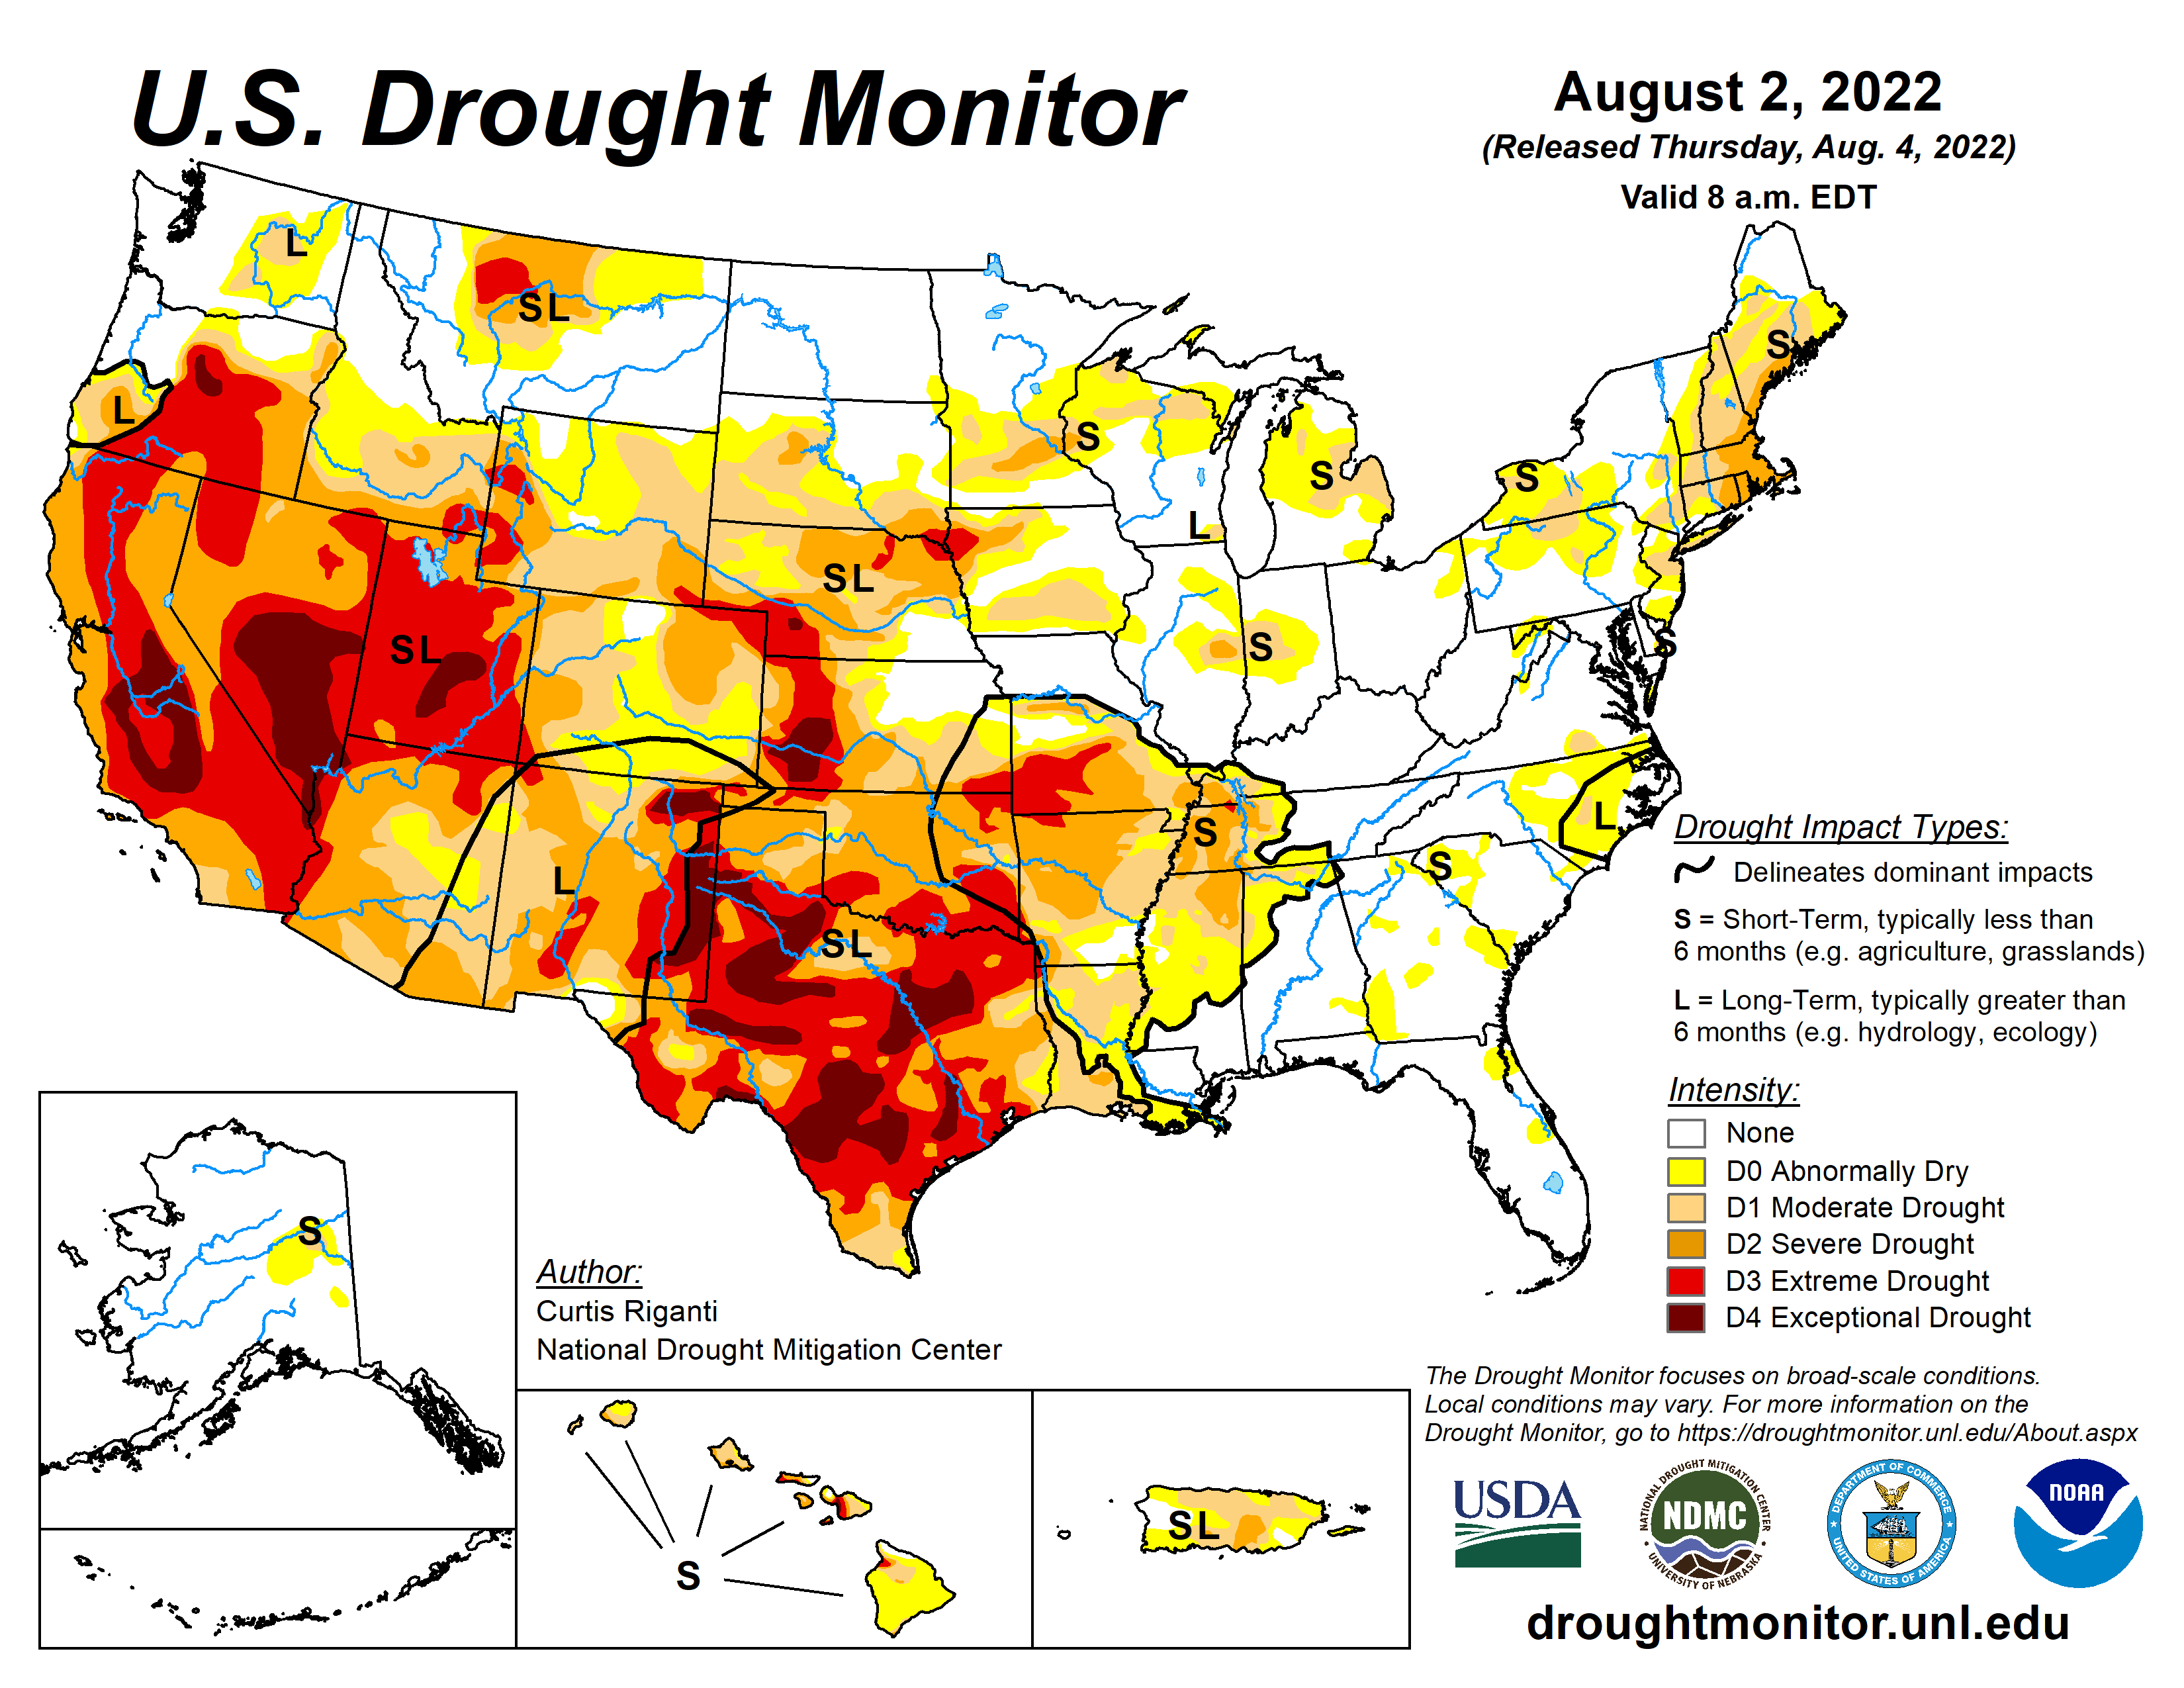 U.S. Drought Monitor, valid August 2, 2022